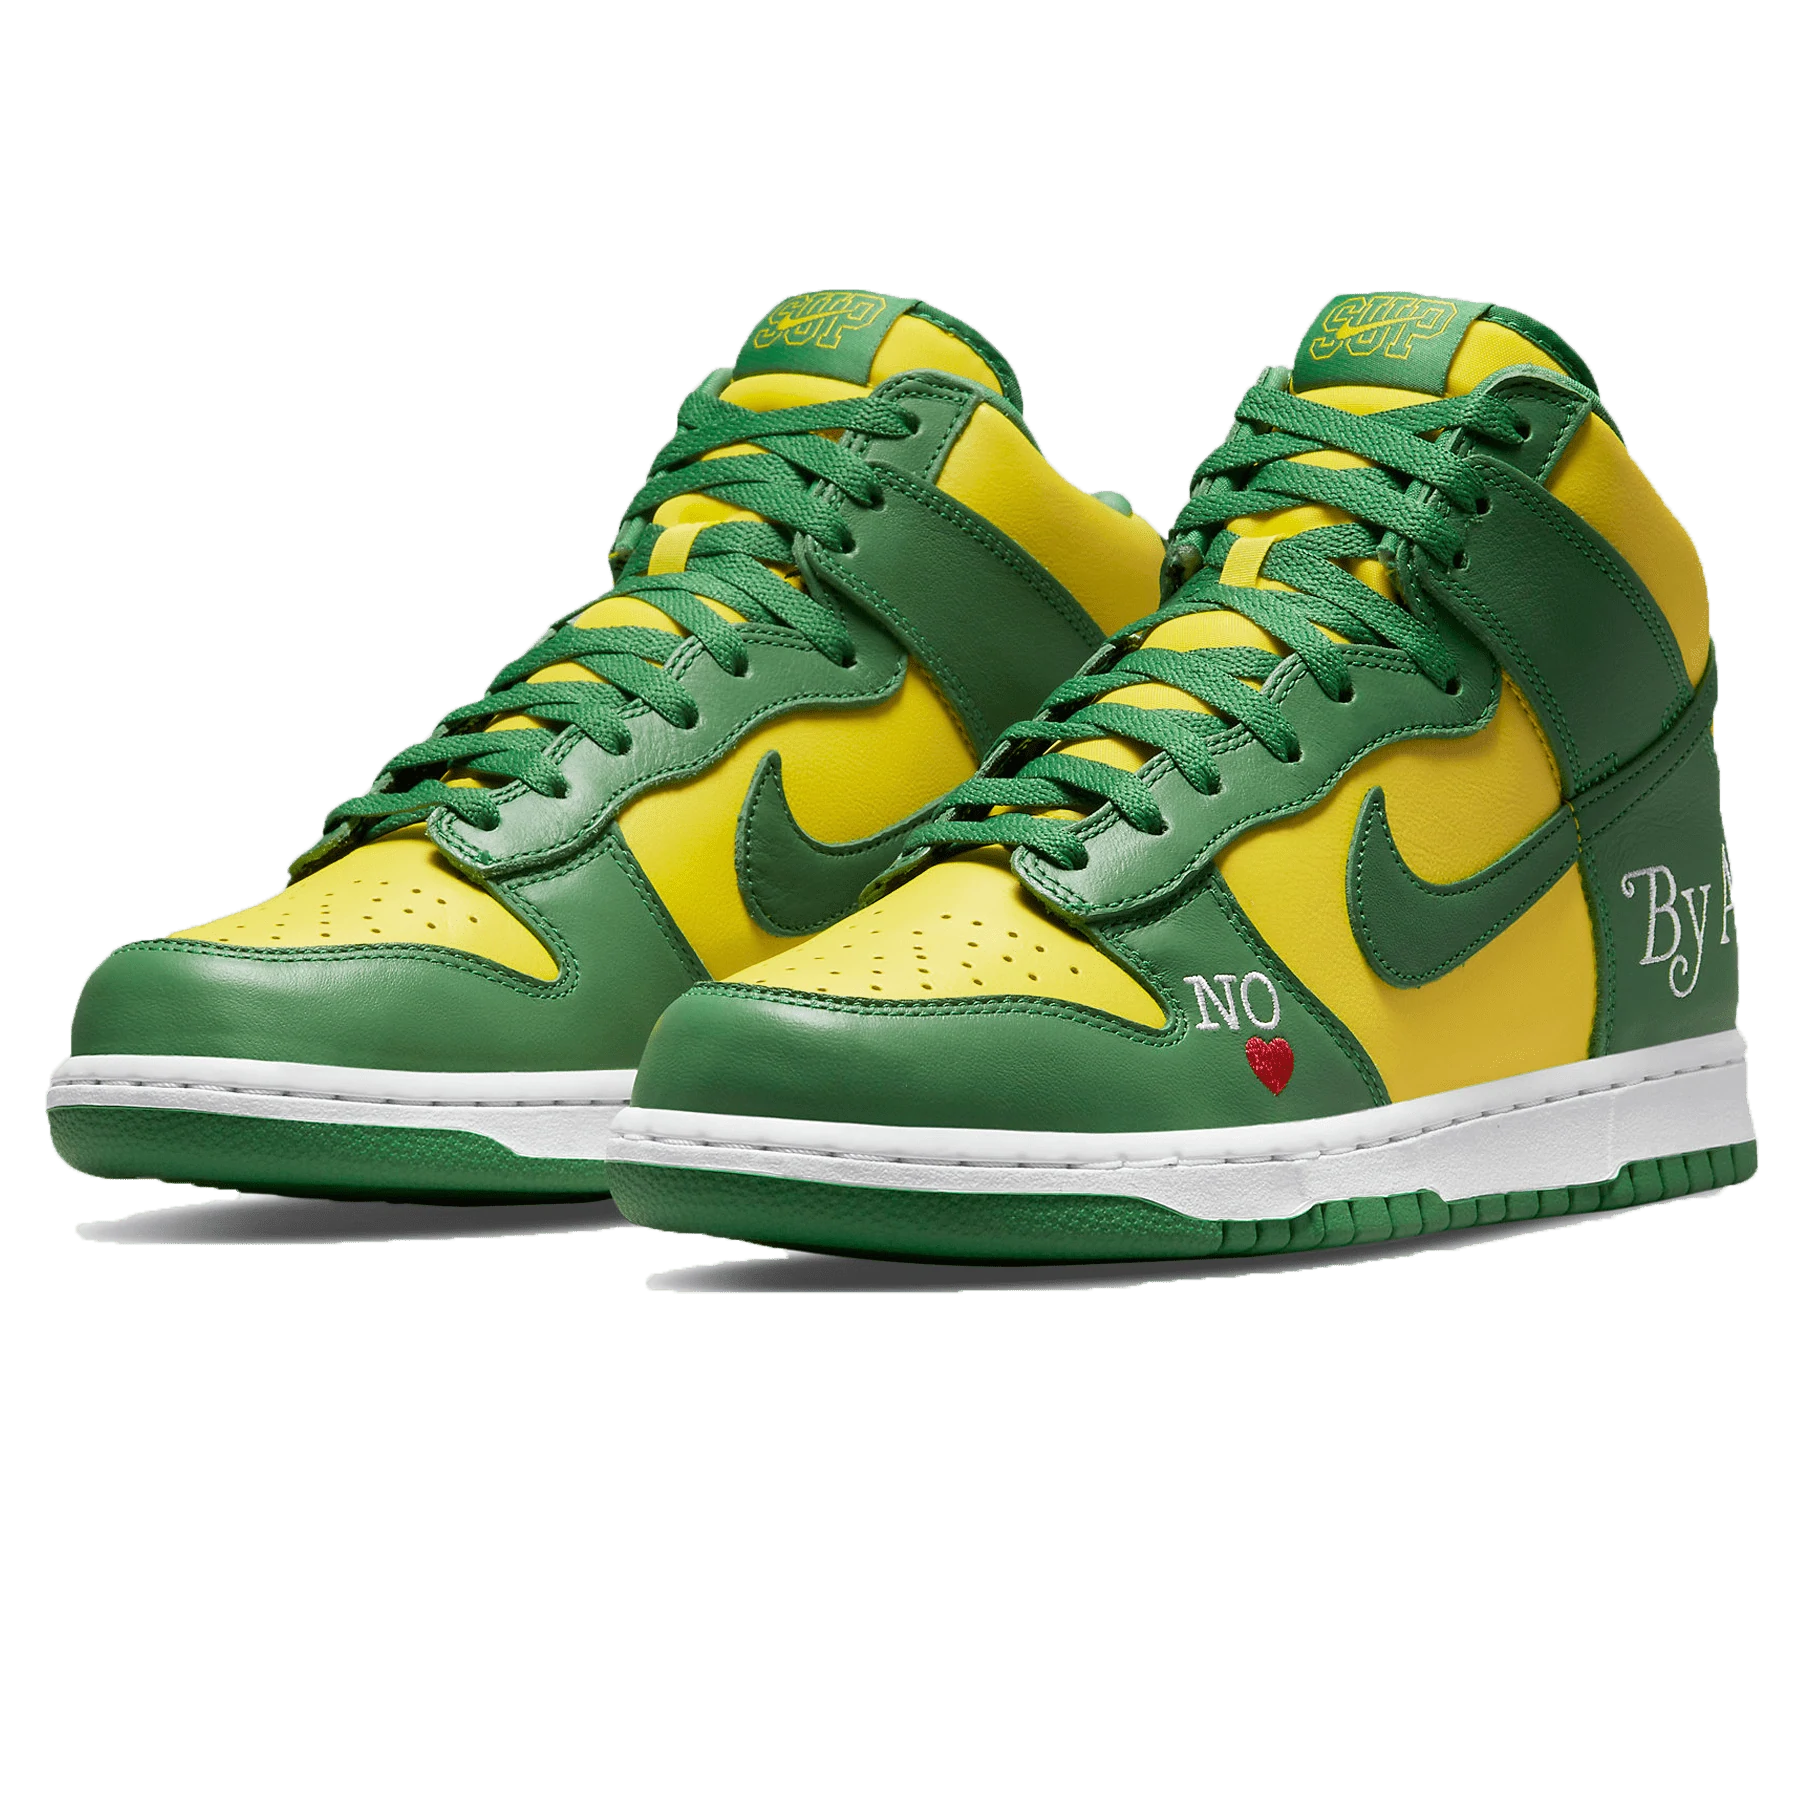 Double Boxed  334.99 Nike SB Dunk High x Supreme By Any Means Brazil Double Boxed